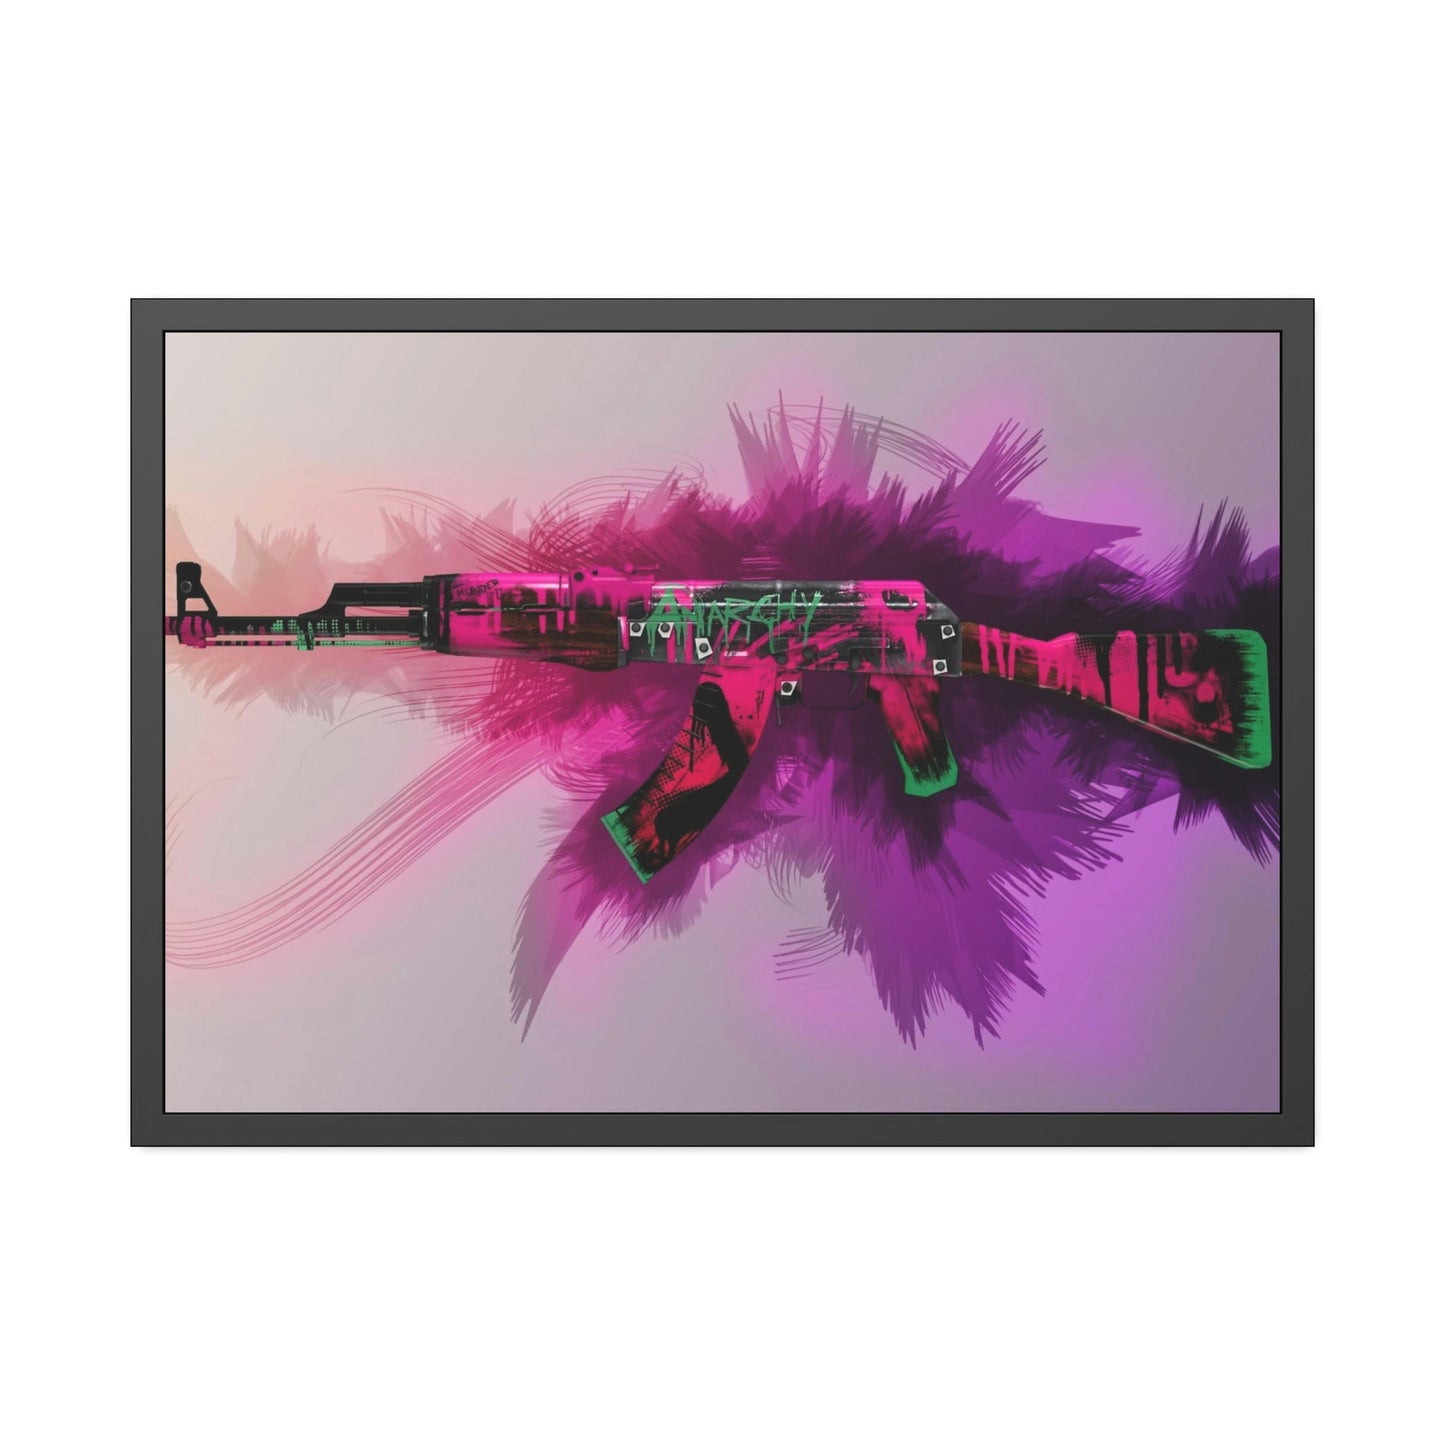 Counter Strike Chronicles: Wall Art on Framed Poster & Canvas